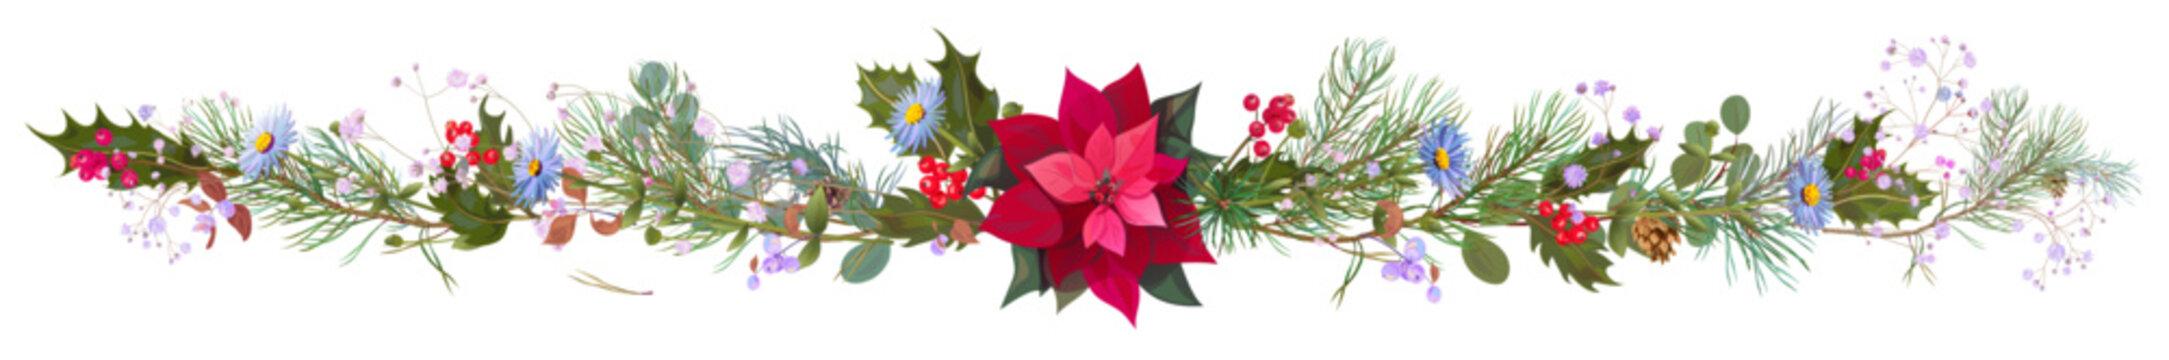 Panoramic view with red poinsettia flower (New Year Star), blue daisy, pine branches, cones, holly berry. Horizontal border for Christmas, white background. Realistic illustration in watercolor style